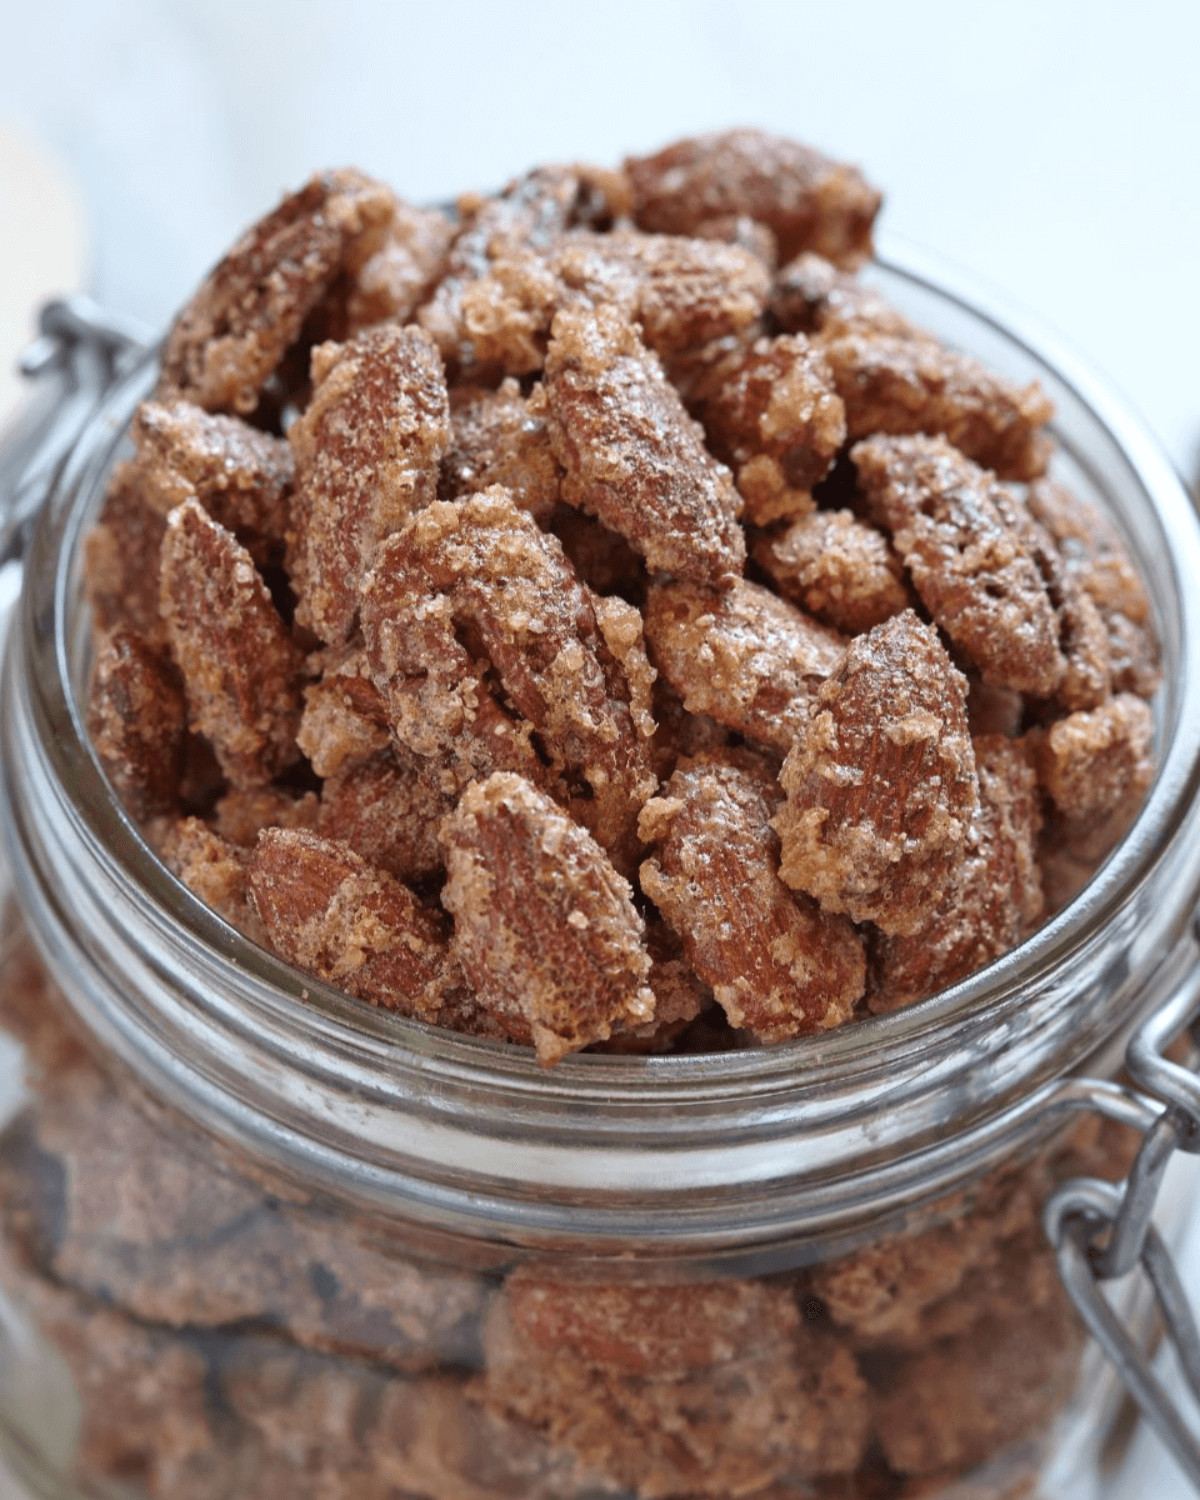 A glass jar of the cinnamon roasted nuts.